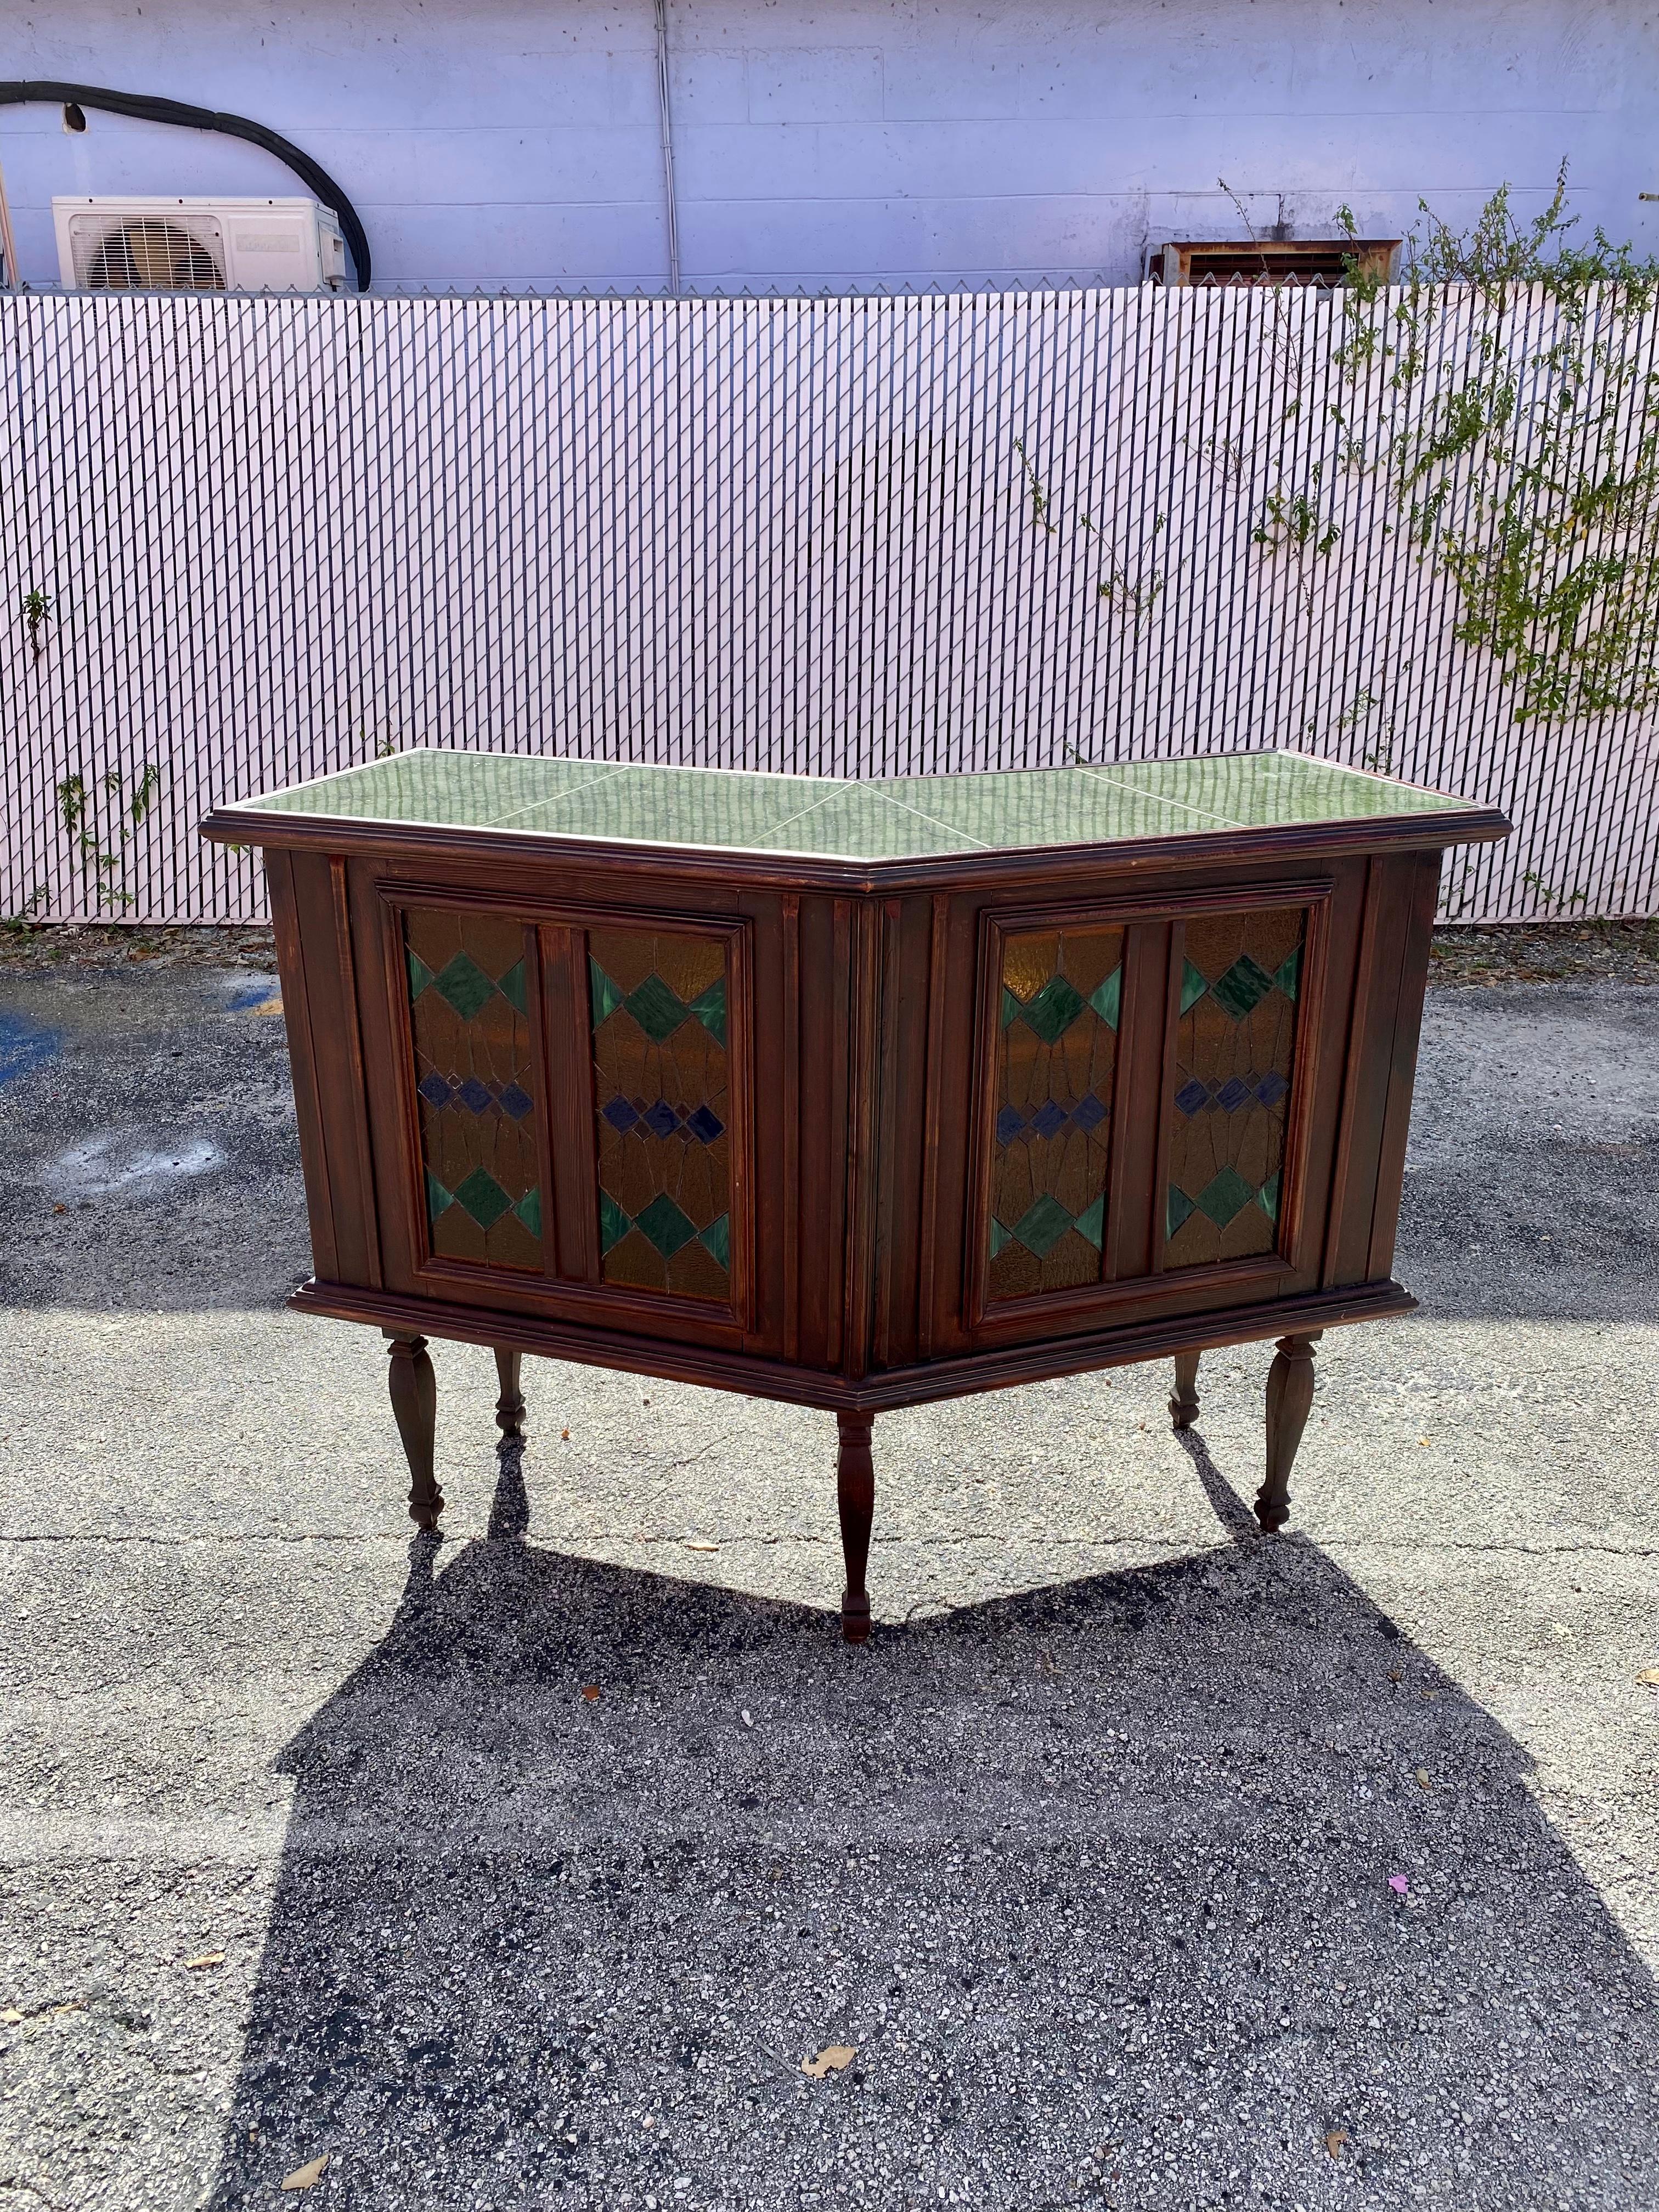 On offer on this occasion is one of the most stunning, Art Deco bar cabinet or versatile table you could hope to find. Outstanding design is exhibited throughout. Just look at the gorgeous details on this beauty! Faux marble tile top. Stained glass